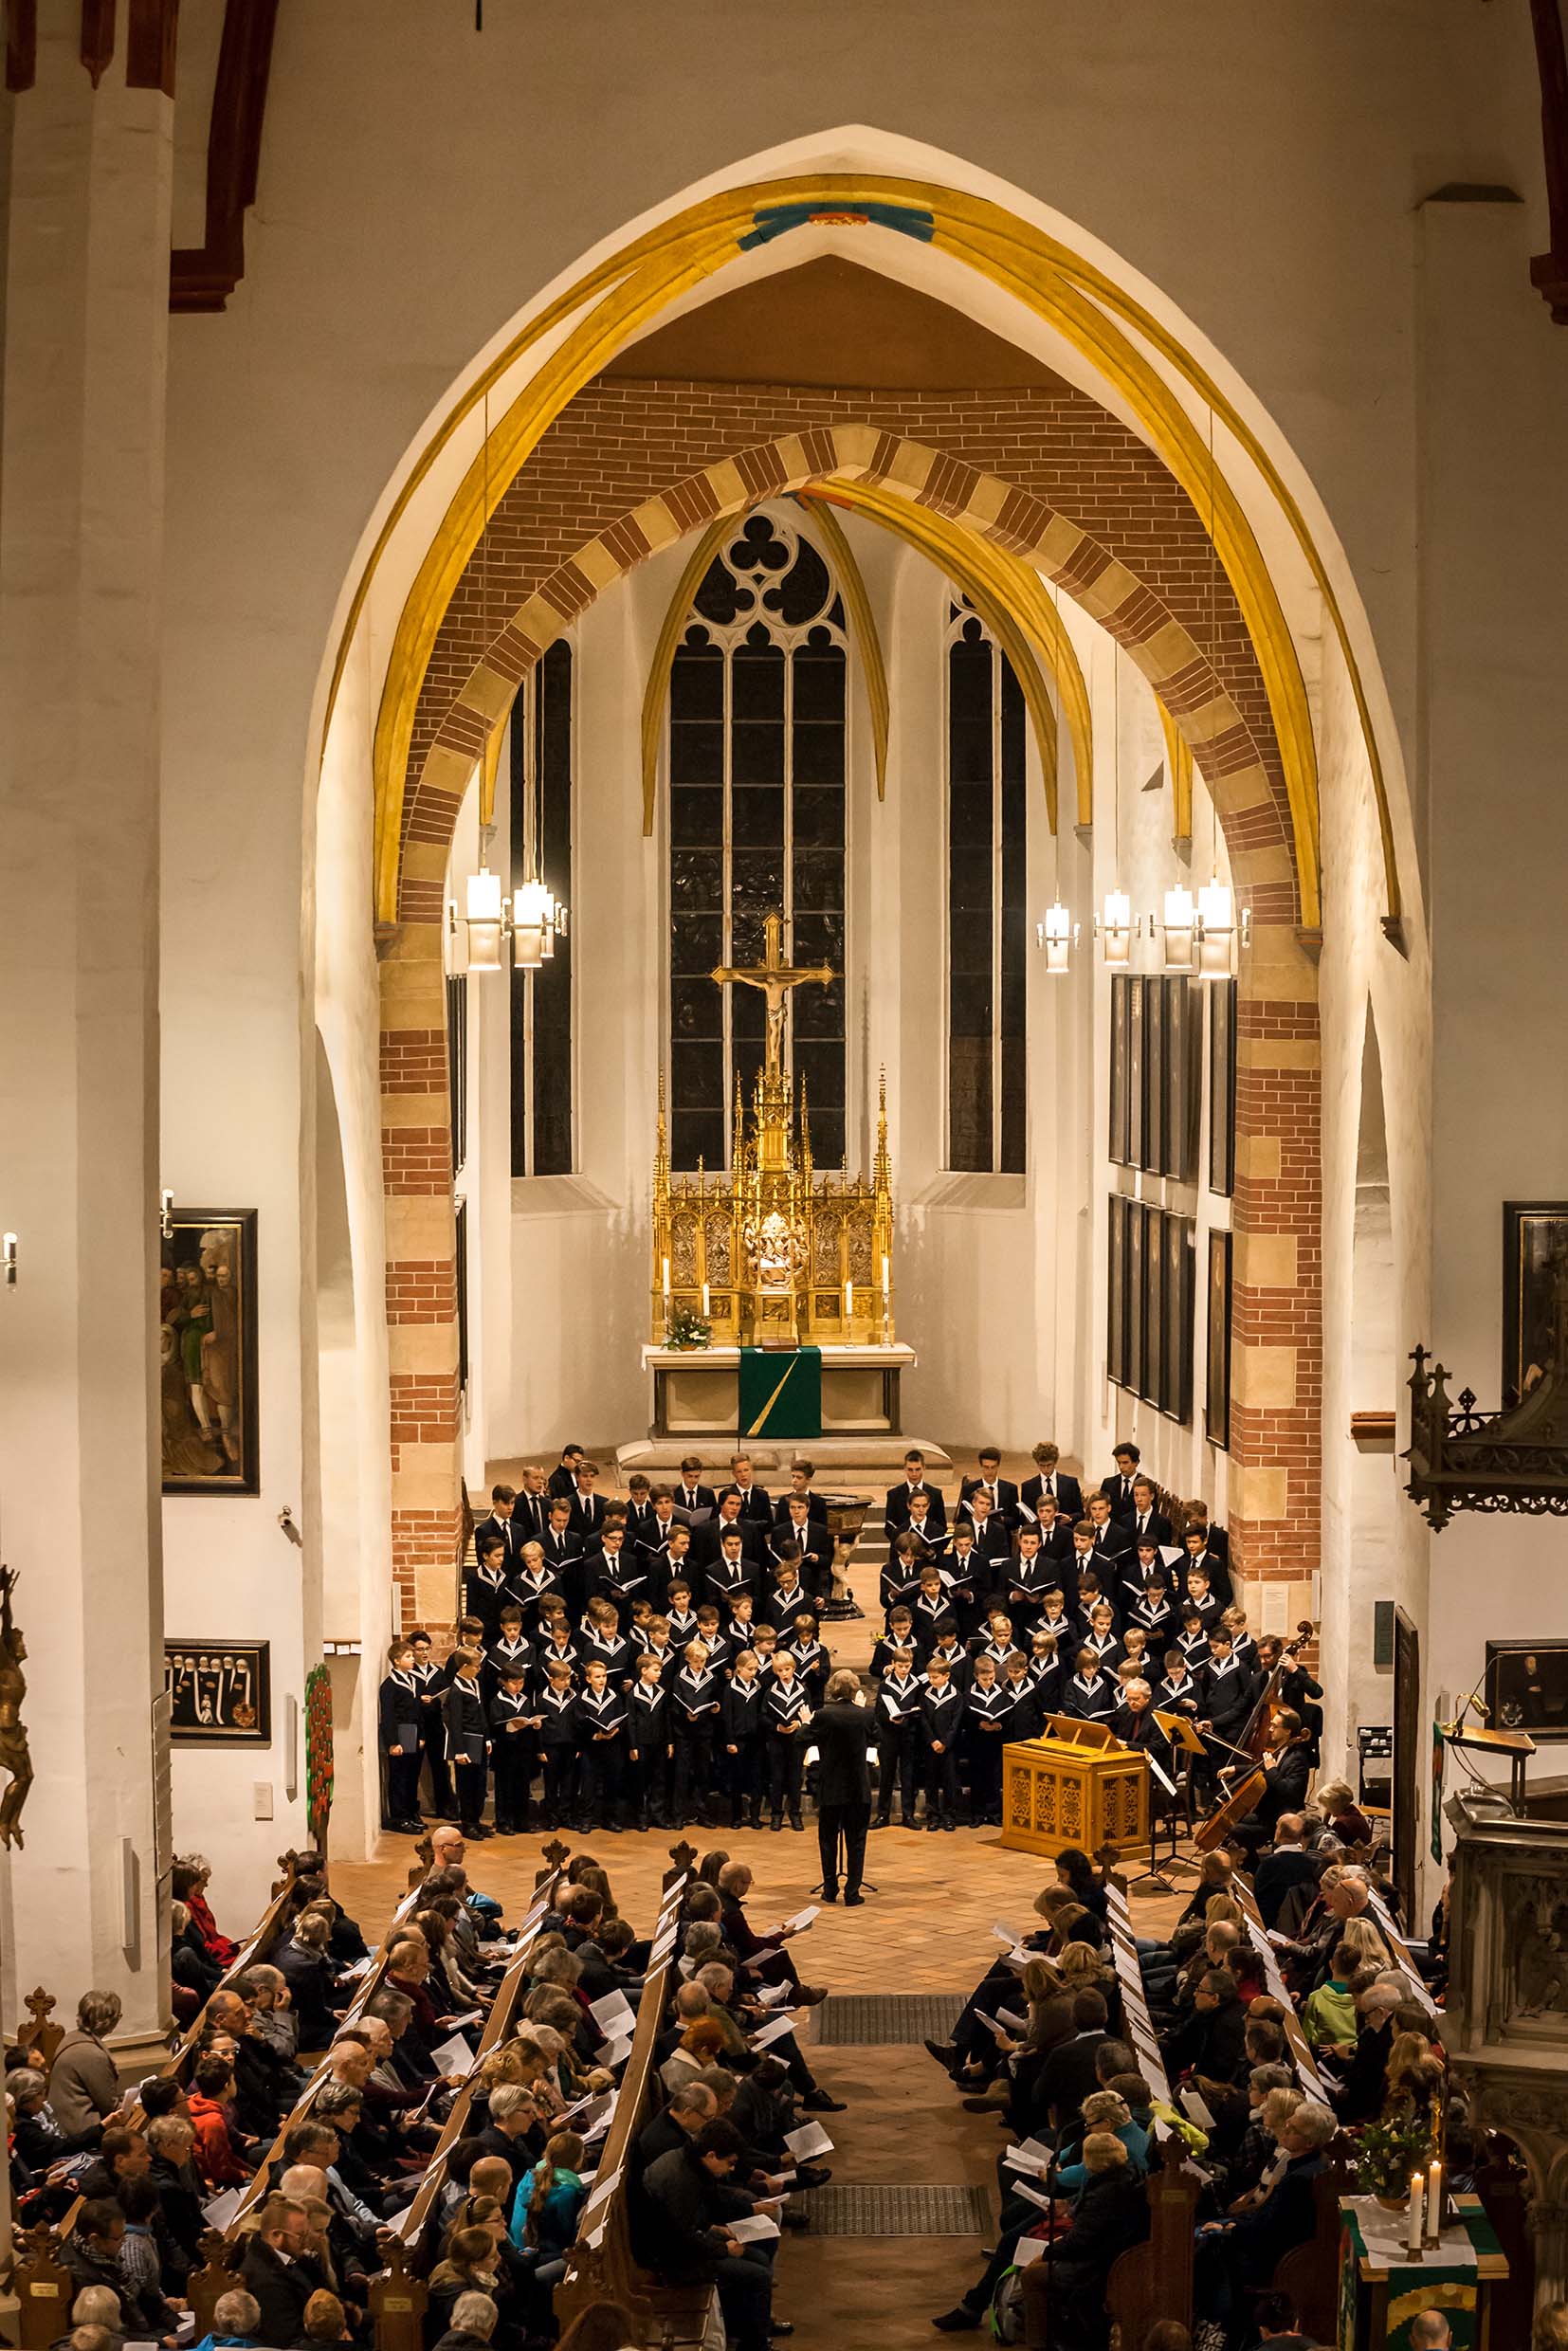 Then and now, the Thomanerchor is instrumental in the performance of Bach cantatas in the Thomaskirche, here under direction of the previous Thomaskantor, Gotthold Schwarz. The predecessors of these choristers performed under Bach's direction as Thomaskantor.